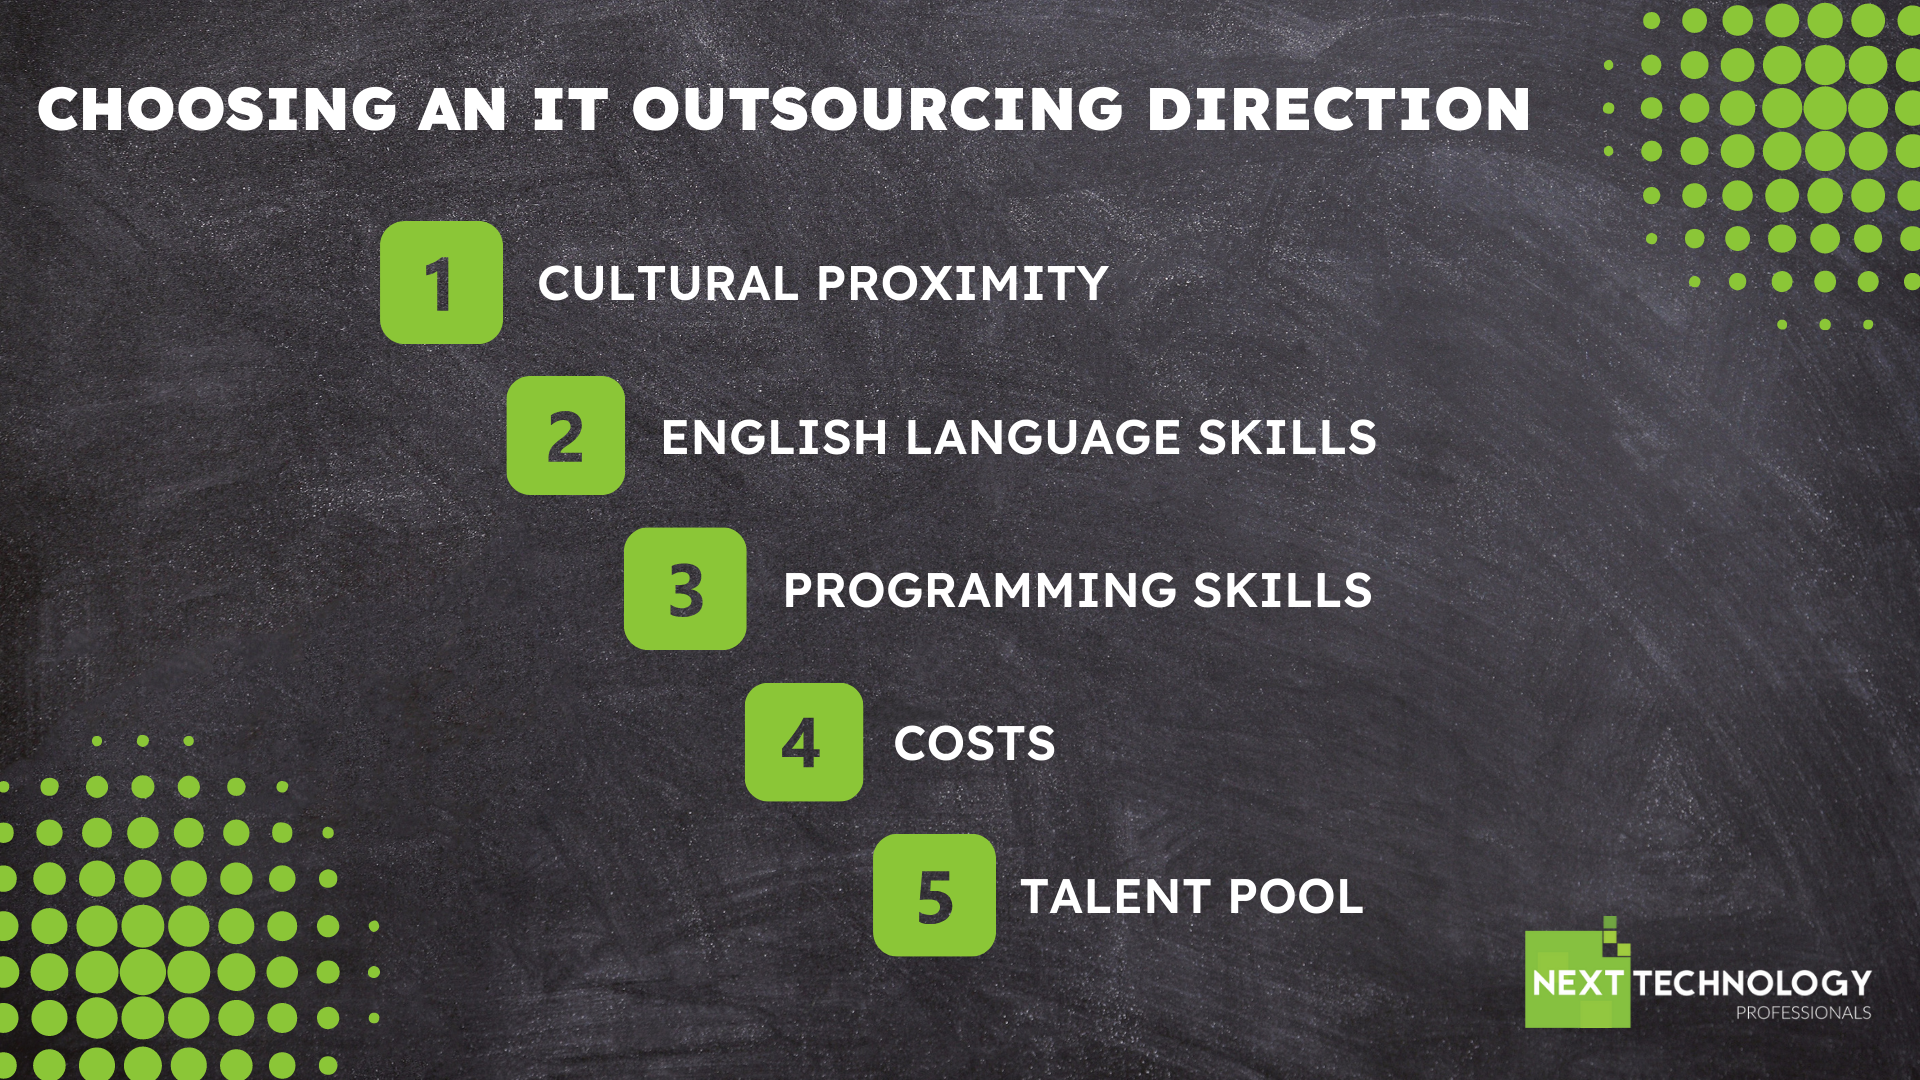 IT outsourcing direction